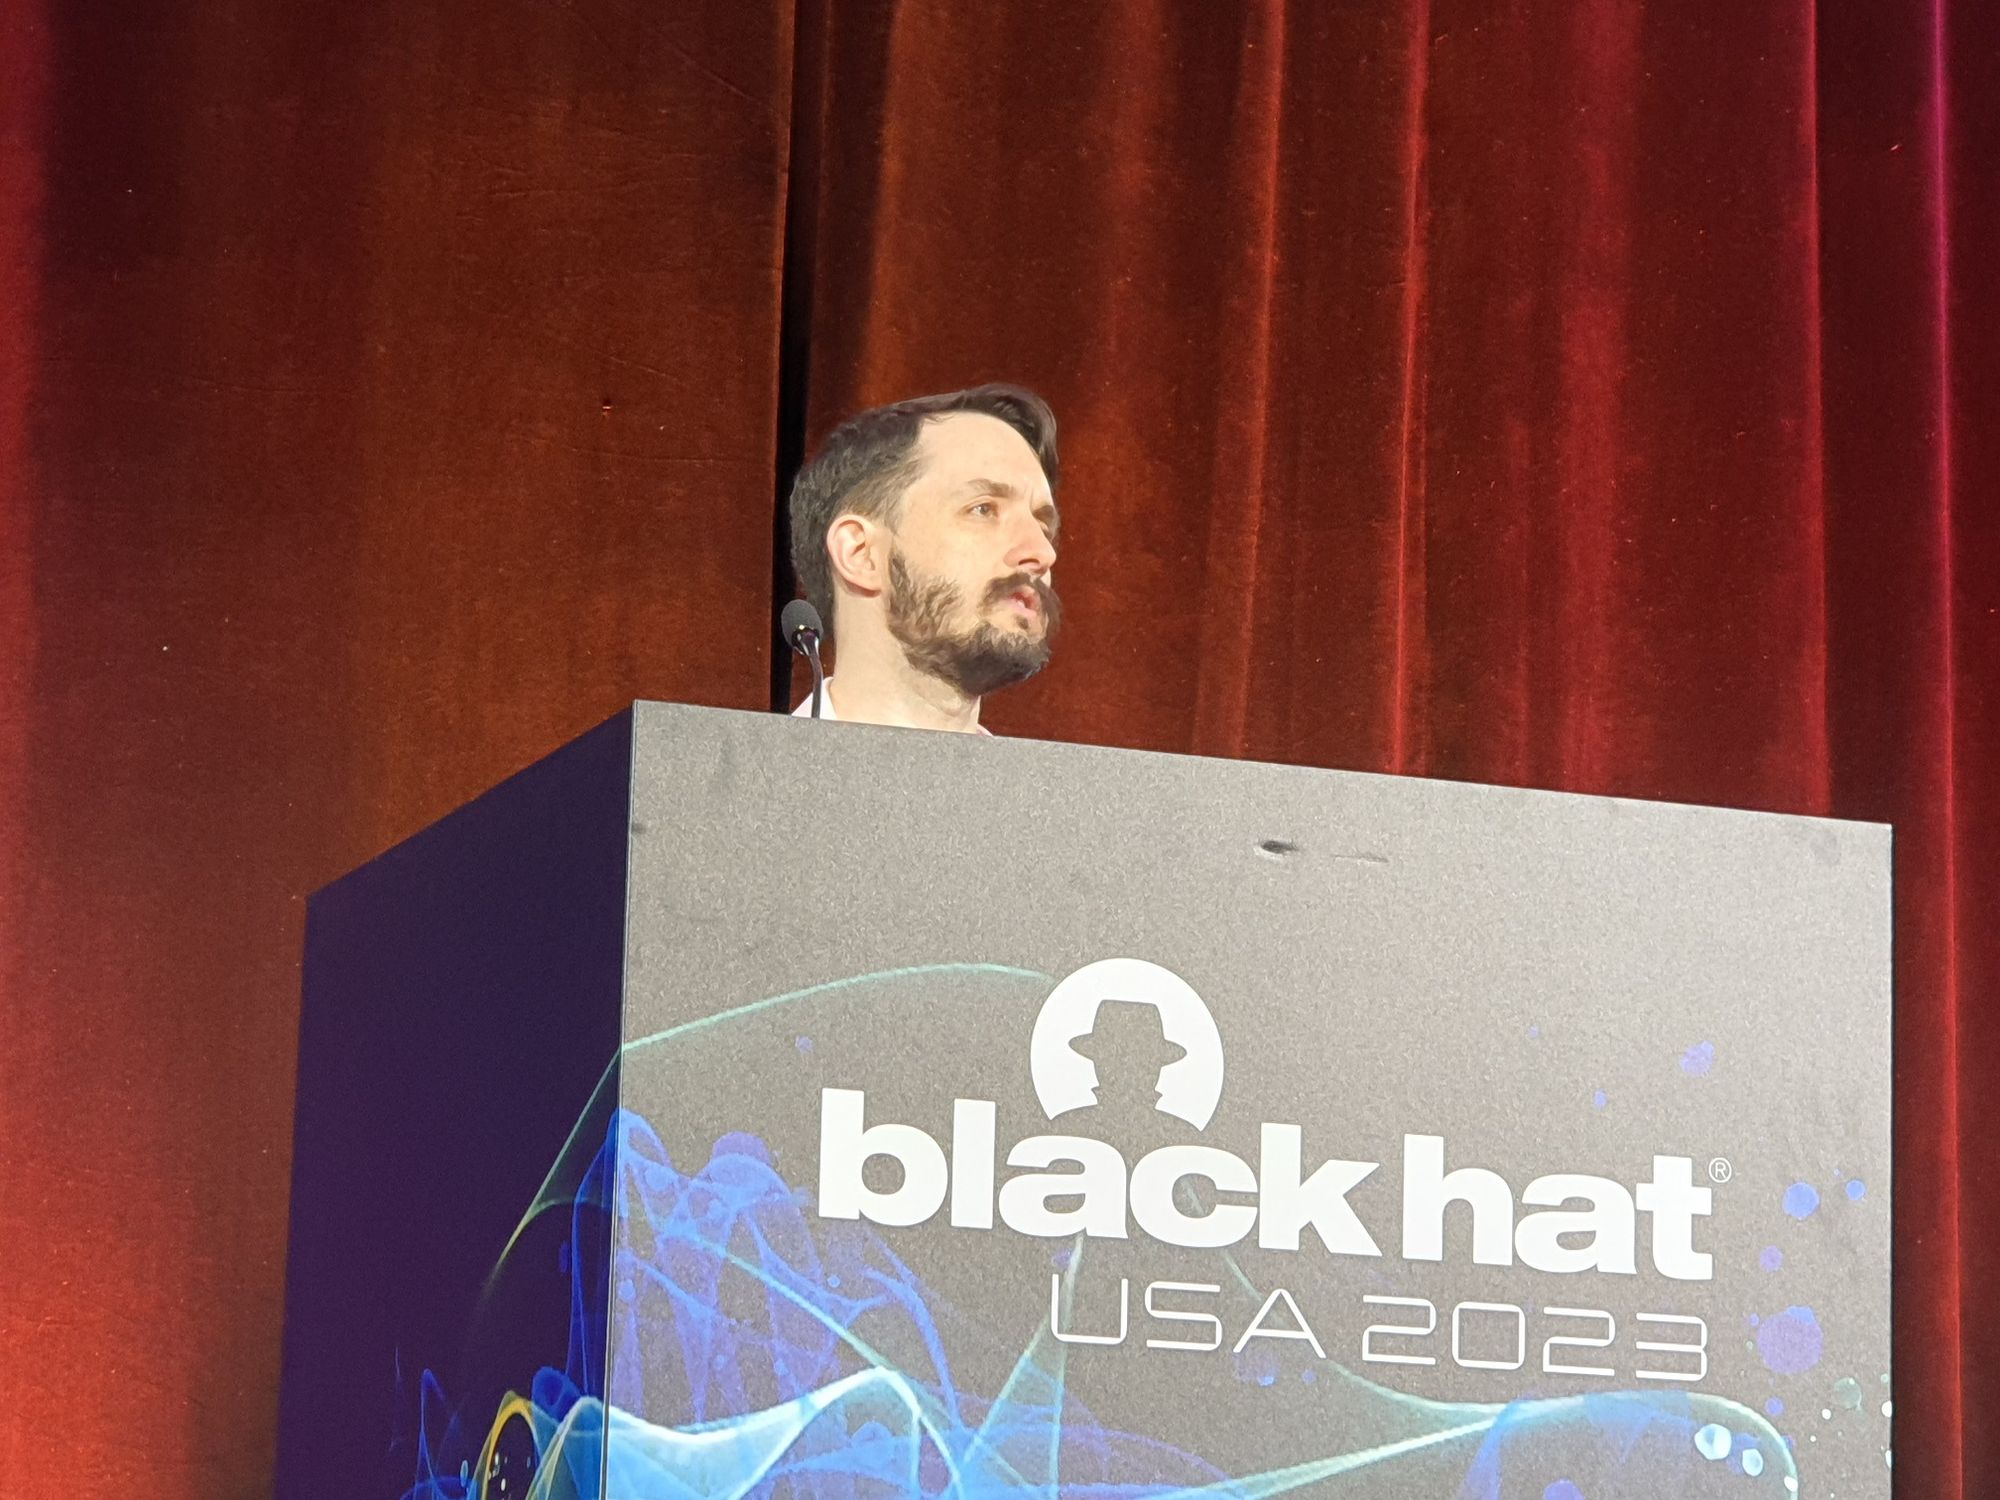 230810 Black Hat GitHub Swanson DO - Psychological safety leads to trust by design, GitHub security strategist says